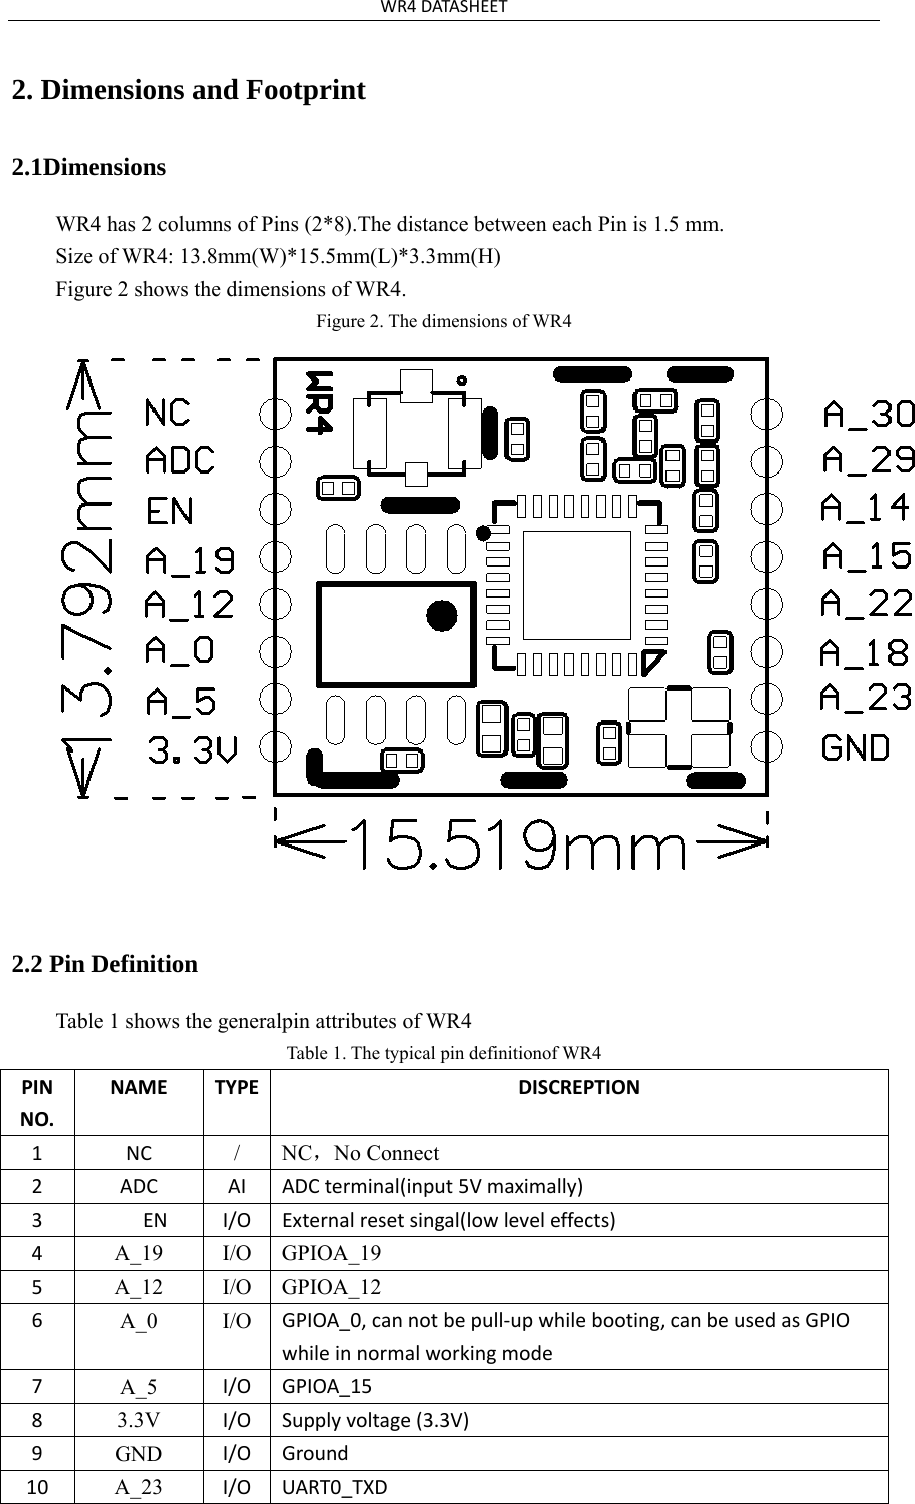 WR4DATASHEET2. Dimensions and Footprint2.1Dimensions WR4 has 2 columns of Pins (2*8).The distance between each Pin is 1.5 mm. Size of WR4: 13.8mm(W)*15.5mm(L)*3.3mm(H) Figure 2 shows the dimensions of WR4. Figure 2. The dimensions of WR4 2.2 Pin Definition Table 1 shows the generalpin attributes of WR4 Table 1. The typical pin definitionof WR4 PINNO.NAMETYPEDISCREPTION1NC/ NC，No Connect 2ADCAIADCterminal(input5Vmaximally)3ENI/OExternalresetsingal(lowleveleffects)4A_19 I/O GPIOA_19 5A_12 I/O GPIOA_12 6A_0 I/O GPIOA_0,cannotbepull‐upwhilebooting,canbeusedasGPIOwhileinnormalworkingmode7A_5  I/OGPIOA_1583.3V  I/OSupplyvoltage(3.3V)9GND  I/OGround10A_23  I/OUART0_TXD